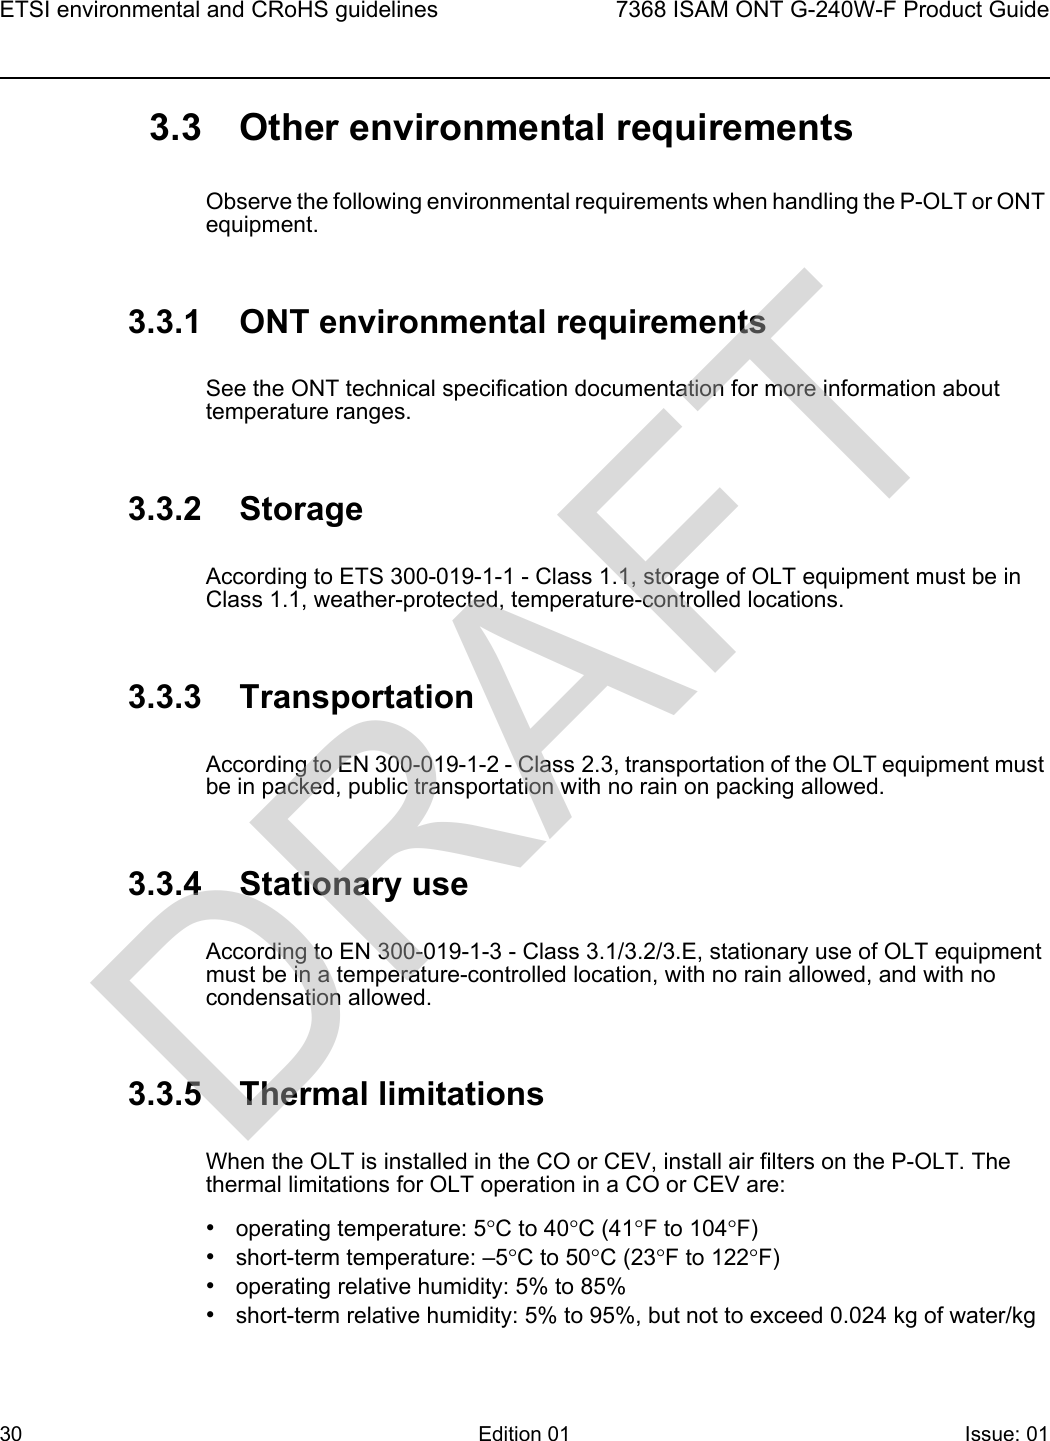 ETSI environmental and CRoHS guidelines307368 ISAM ONT G-240W-F Product GuideEdition 01 Issue: 01 3.3 Other environmental requirementsObserve the following environmental requirements when handling the P-OLT or ONT equipment.3.3.1 ONT environmental requirementsSee the ONT technical specification documentation for more information about temperature ranges.3.3.2 StorageAccording to ETS 300-019-1-1 - Class 1.1, storage of OLT equipment must be in Class 1.1, weather-protected, temperature-controlled locations.3.3.3 TransportationAccording to EN 300-019-1-2 - Class 2.3, transportation of the OLT equipment must be in packed, public transportation with no rain on packing allowed.3.3.4 Stationary useAccording to EN 300-019-1-3 - Class 3.1/3.2/3.E, stationary use of OLT equipment must be in a temperature-controlled location, with no rain allowed, and with no condensation allowed.3.3.5 Thermal limitationsWhen the OLT is installed in the CO or CEV, install air filters on the P-OLT. The thermal limitations for OLT operation in a CO or CEV are:•operating temperature: 5°C to 40°C (41°F to 104°F)•short-term temperature: –5°C to 50°C (23°F to 122°F)•operating relative humidity: 5% to 85%•short-term relative humidity: 5% to 95%, but not to exceed 0.024 kg of water/kgDRAFT